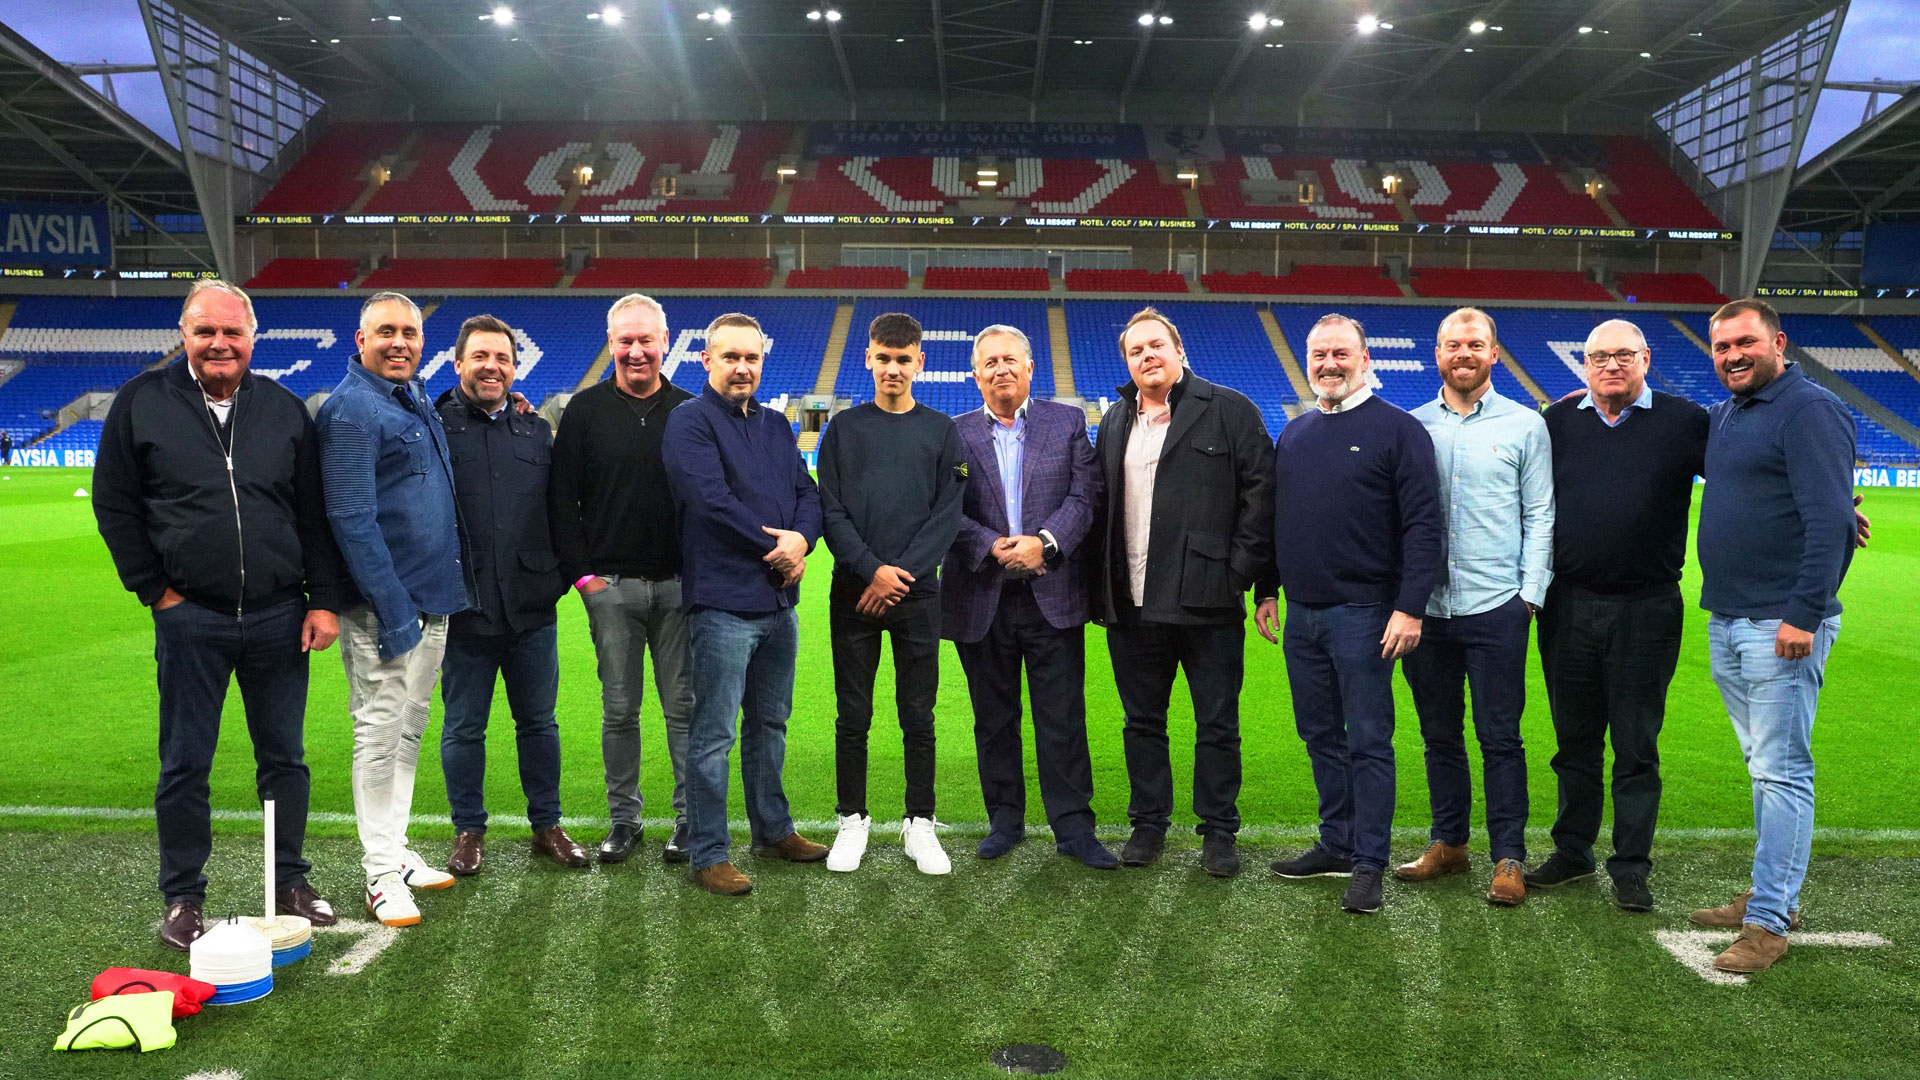 Fine Wines Direct UK were our sponsors when Blackburn Rovers visited CCS...